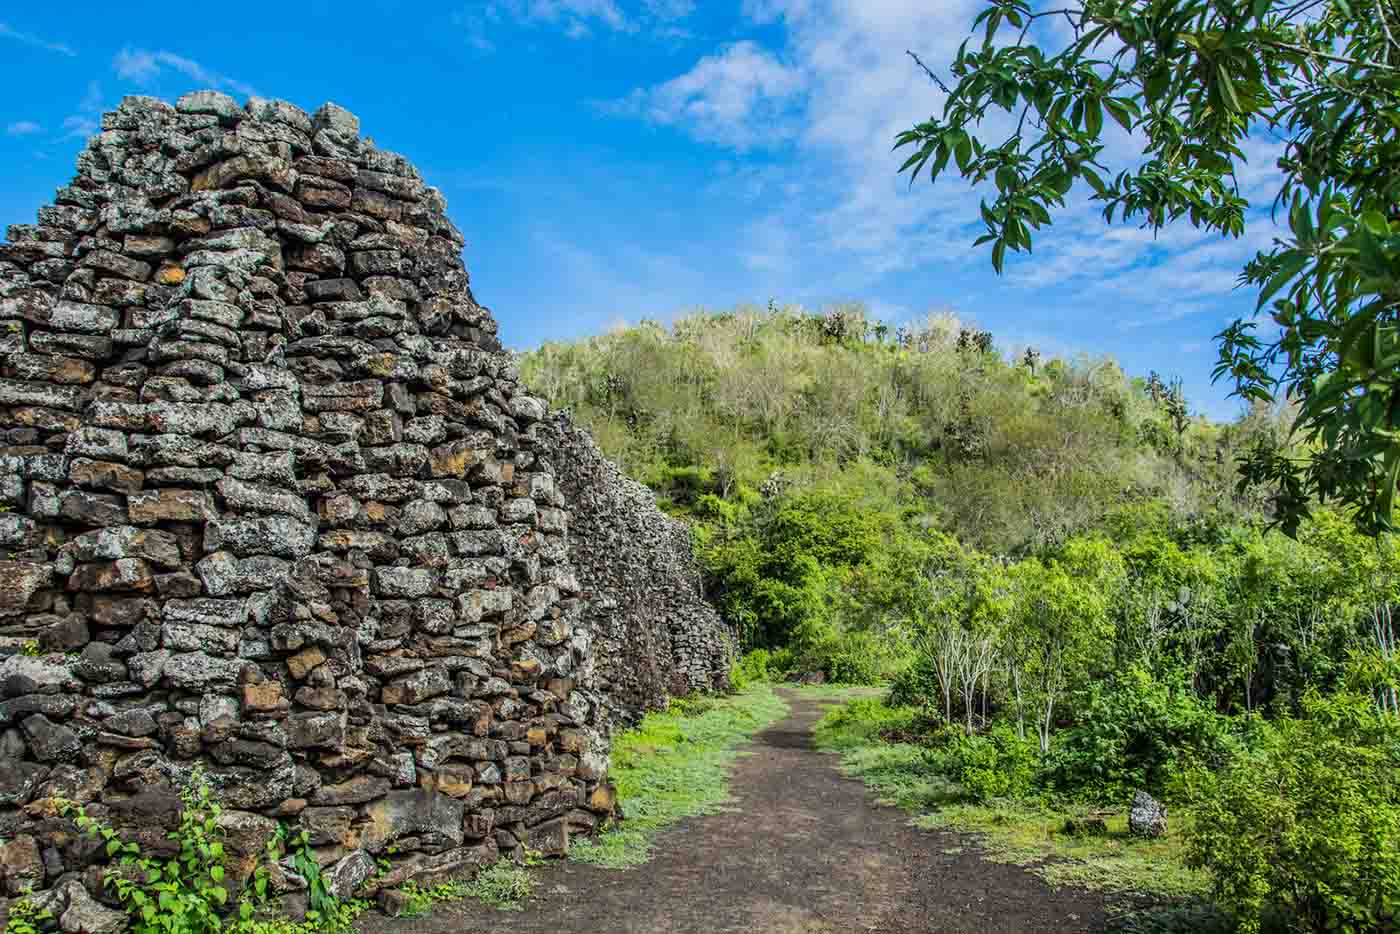  Galapagos | The Wall of Tears in Galapagos Islands: A Historical Exploration